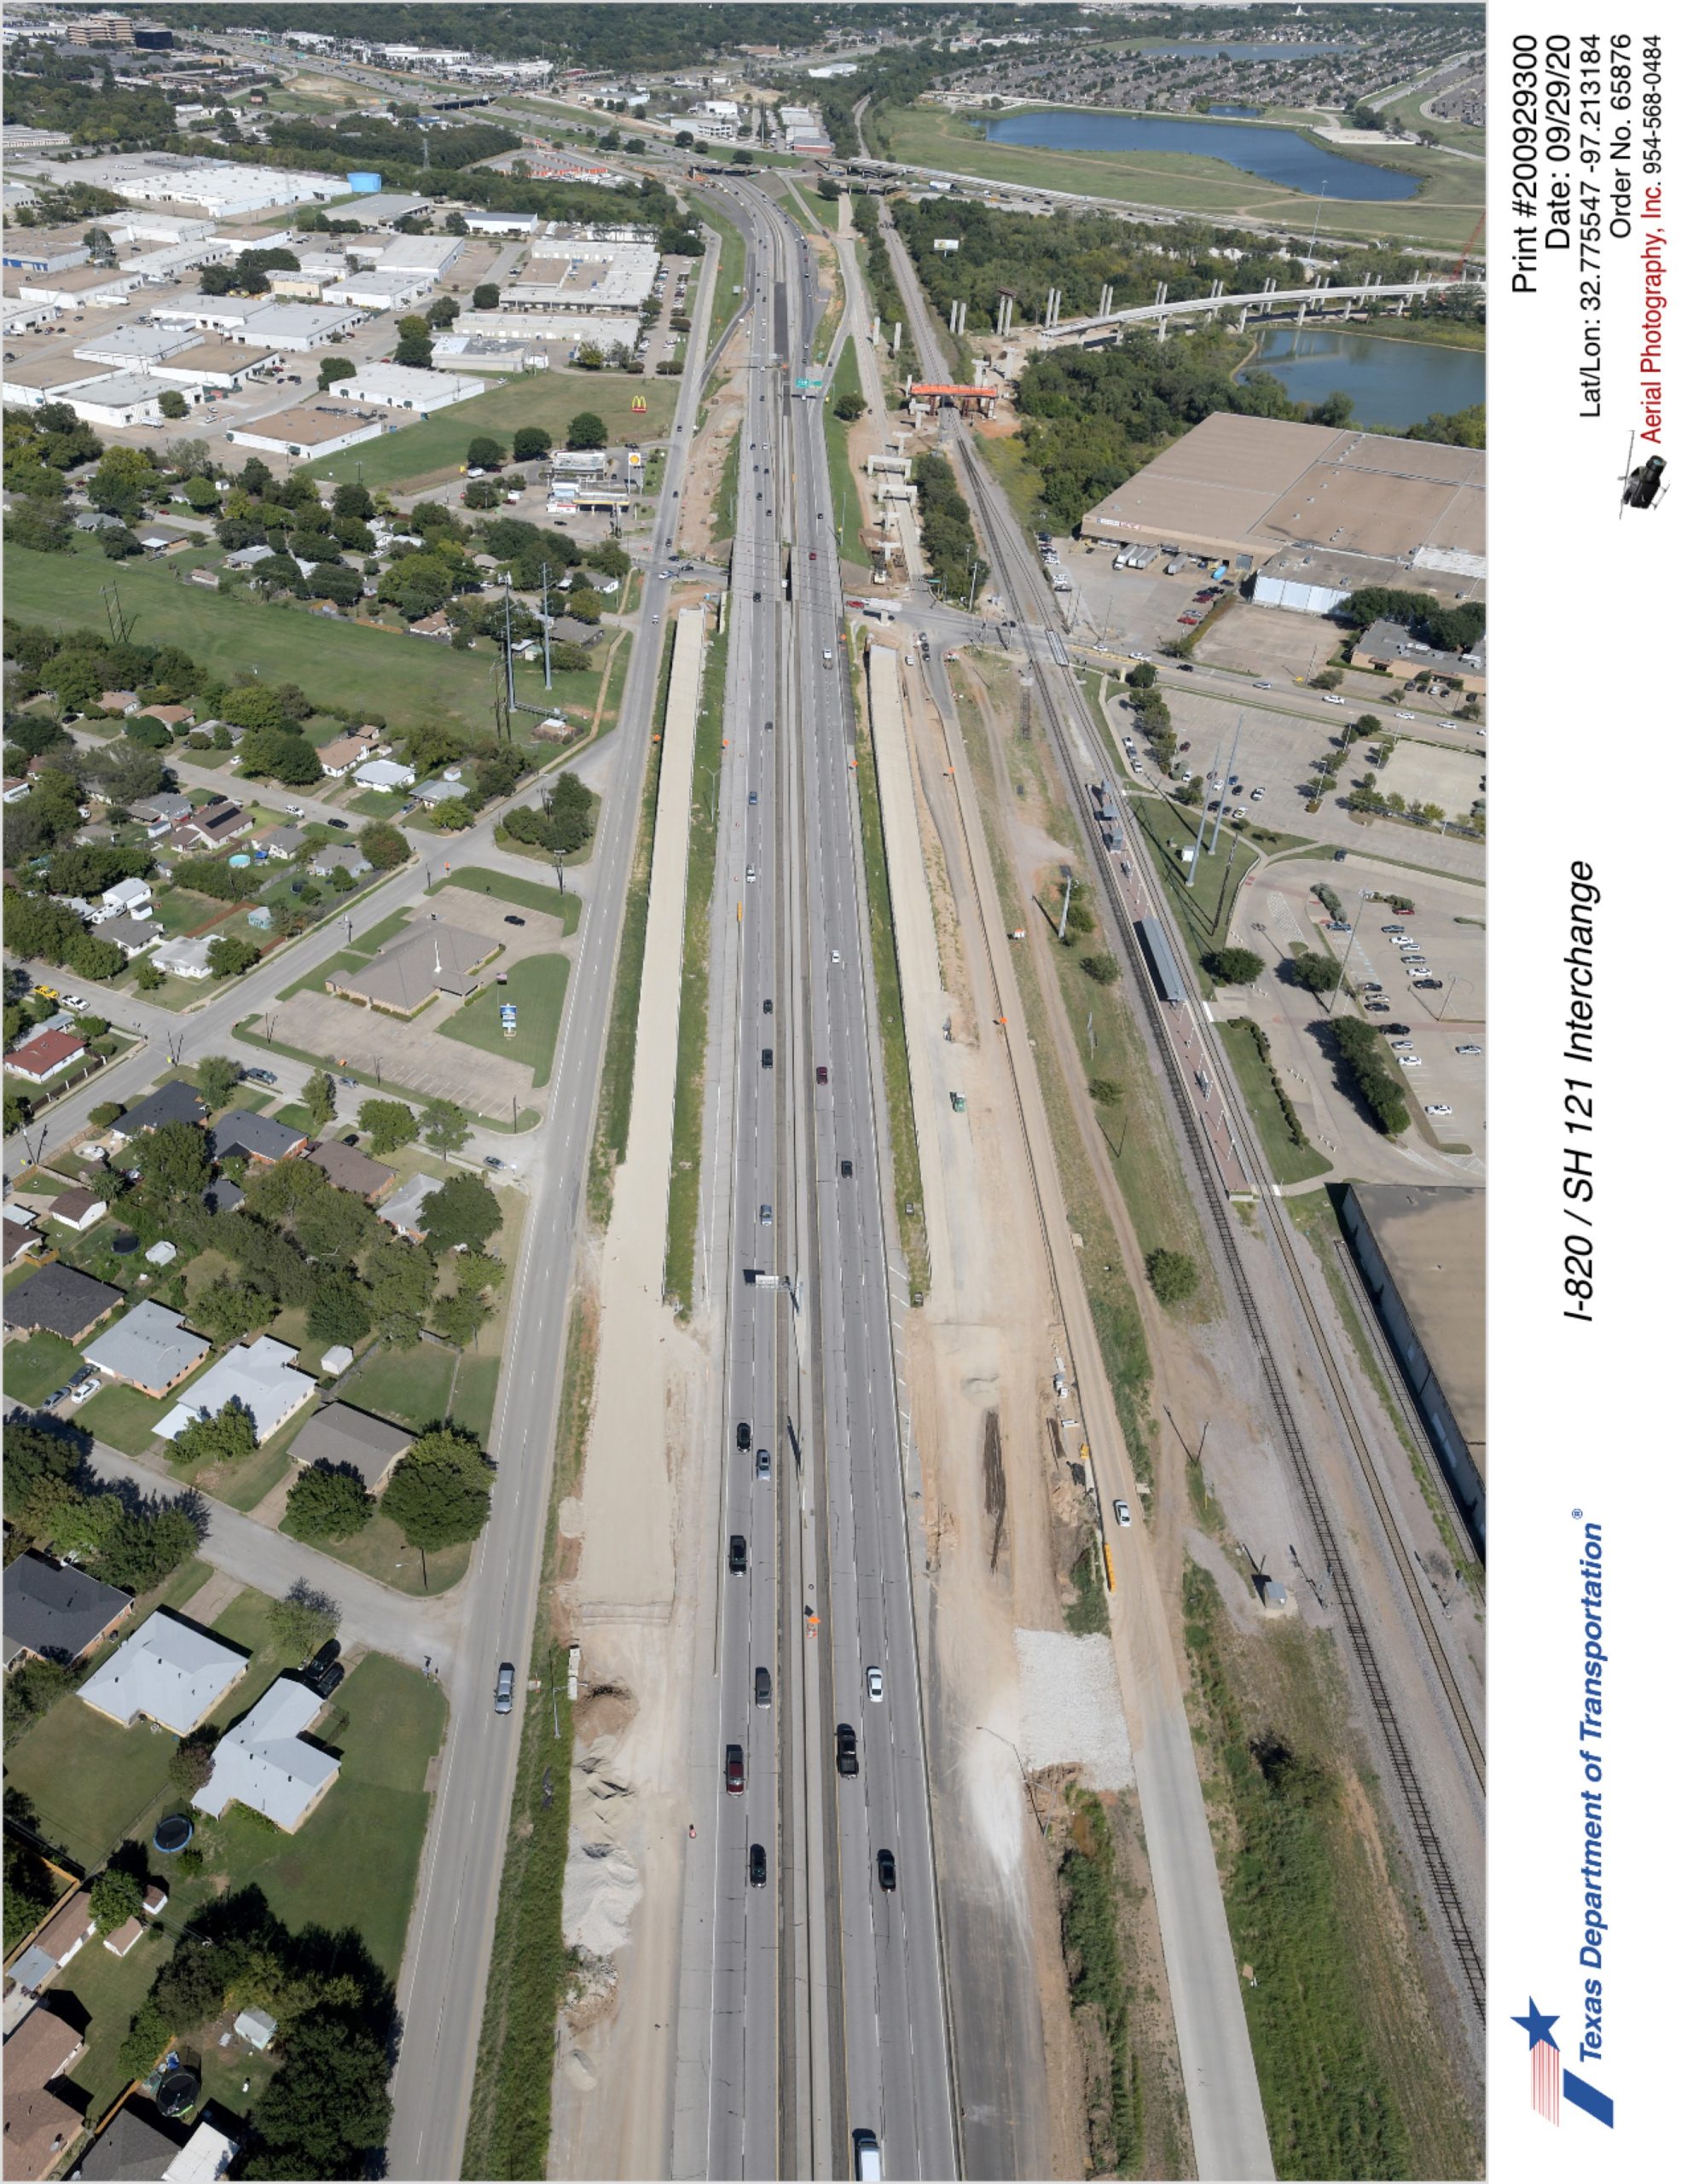 SH 121 looking northeast with Handley-Ederville Rd intersection in background. Construction of highway direct connectors shown in the background.